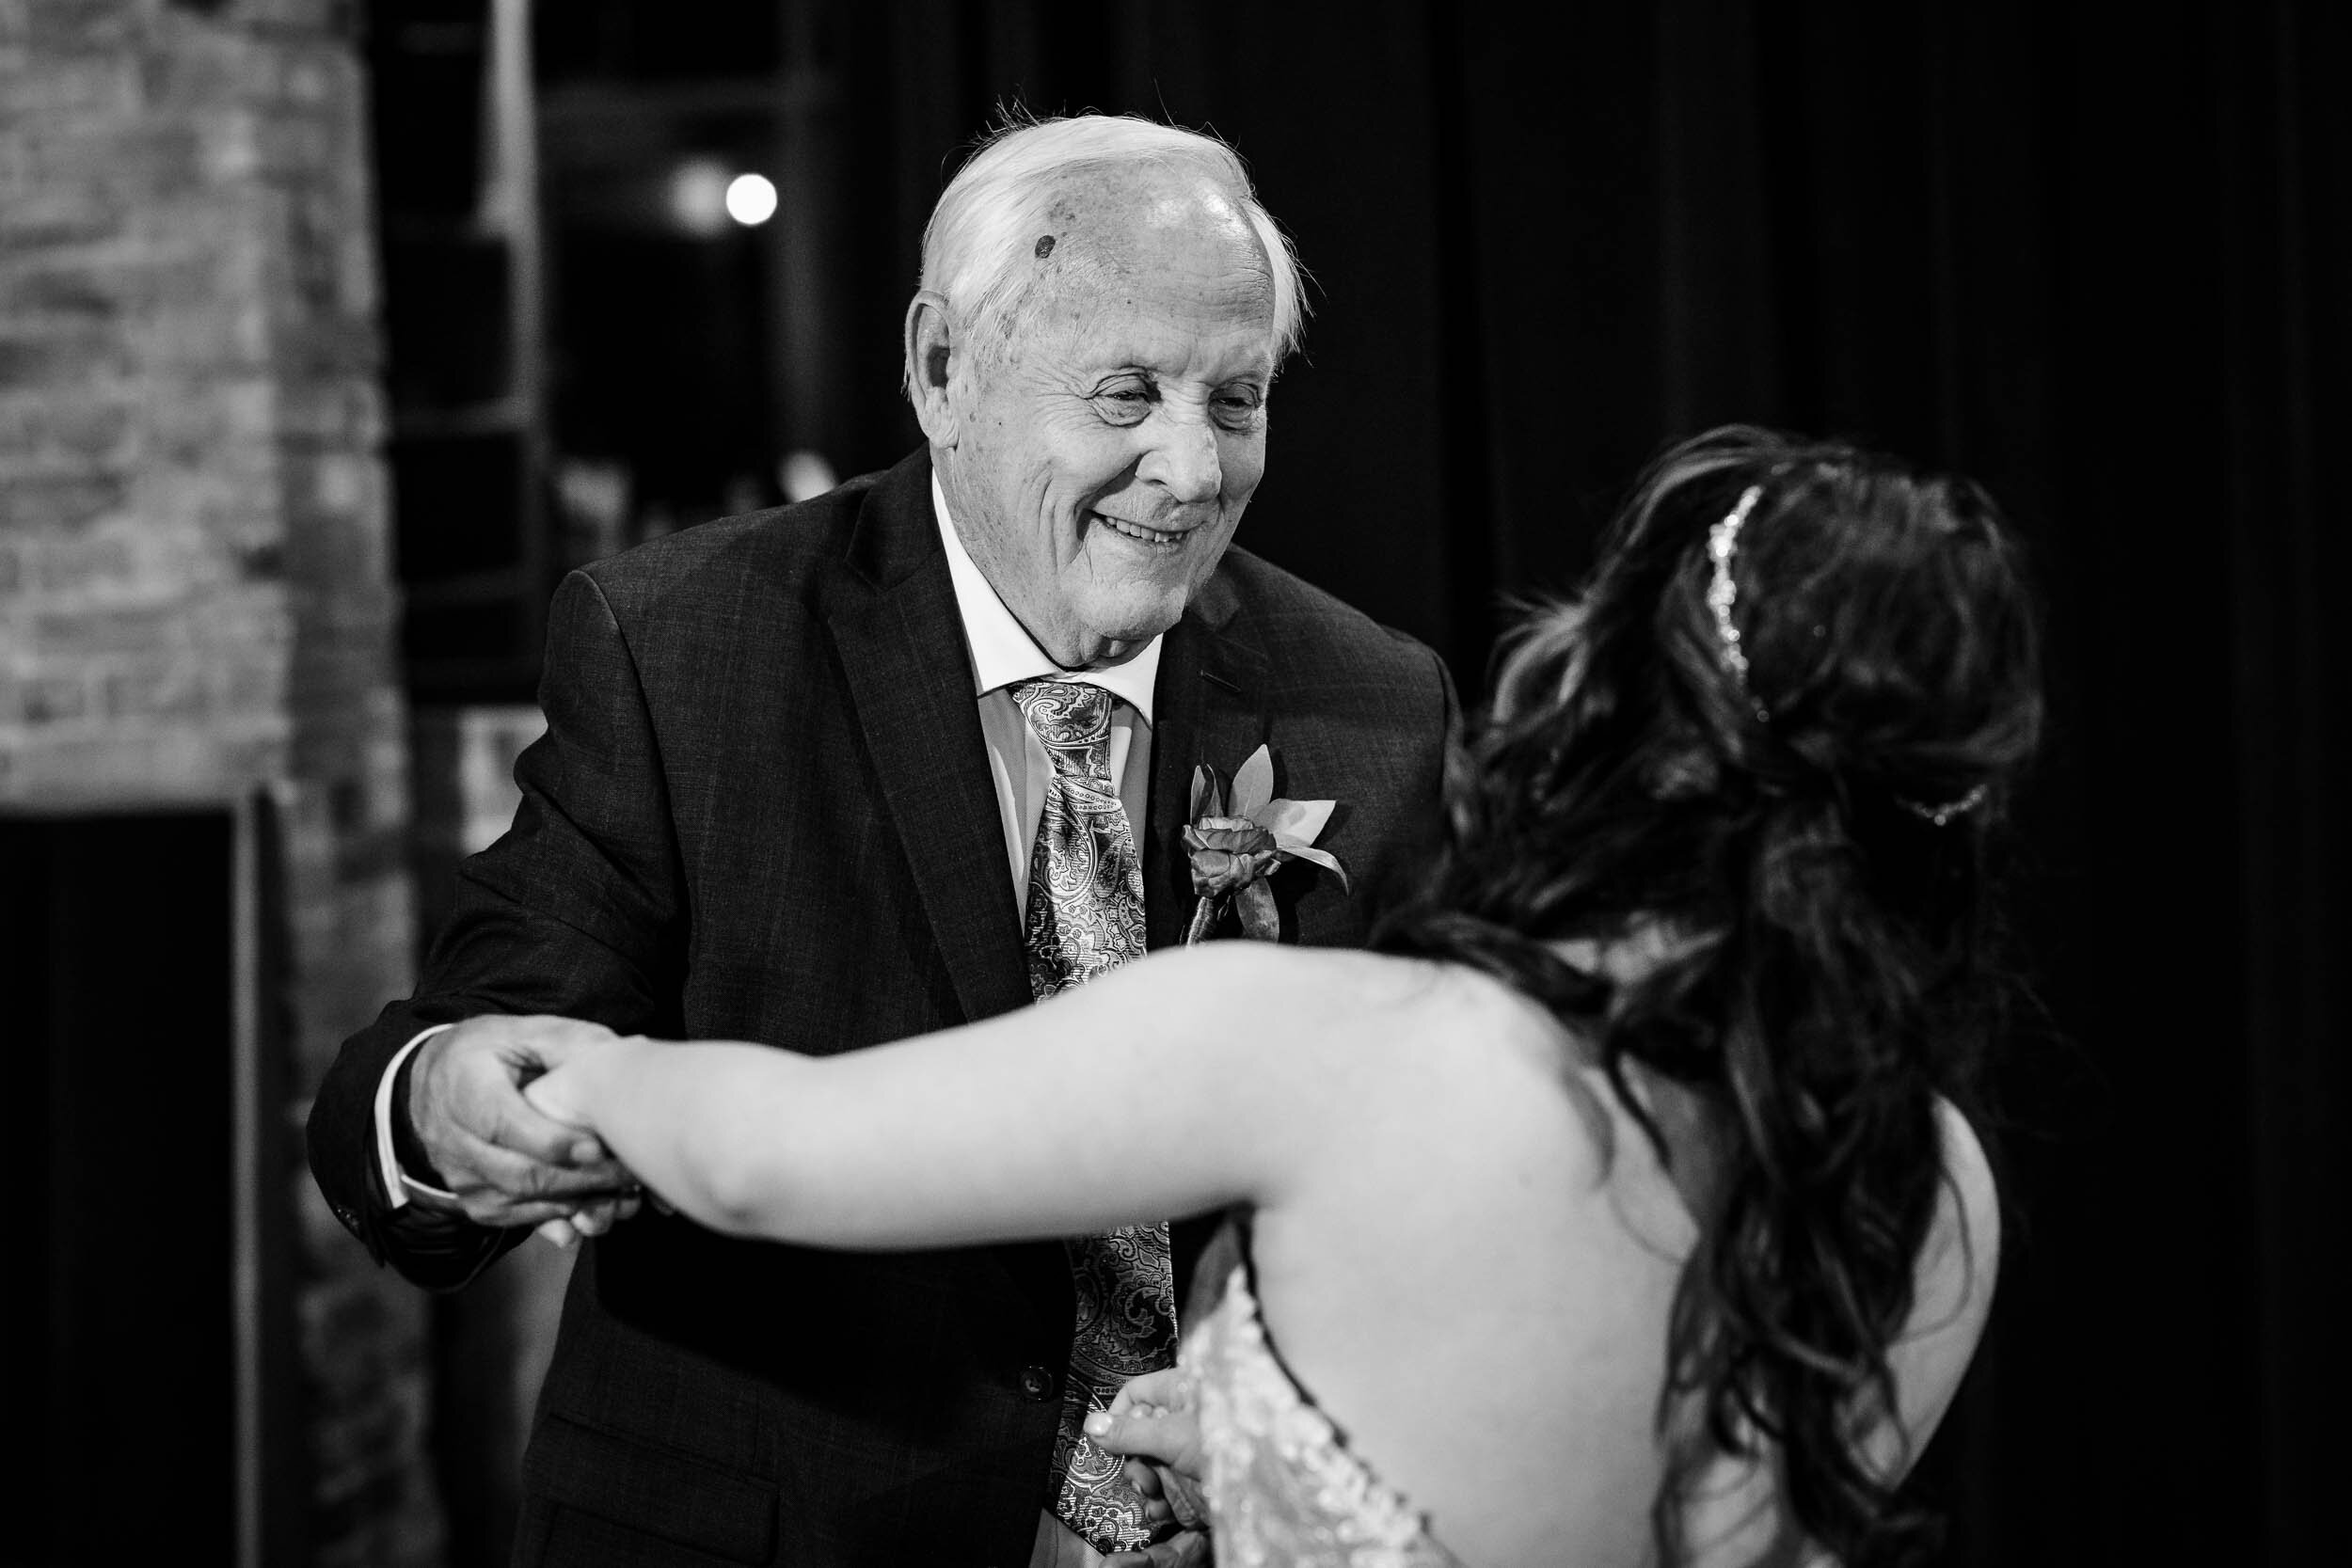 Chicago Wedding Photographer | City Winery | J. Brown Photography | father-daughter dance during the reception.